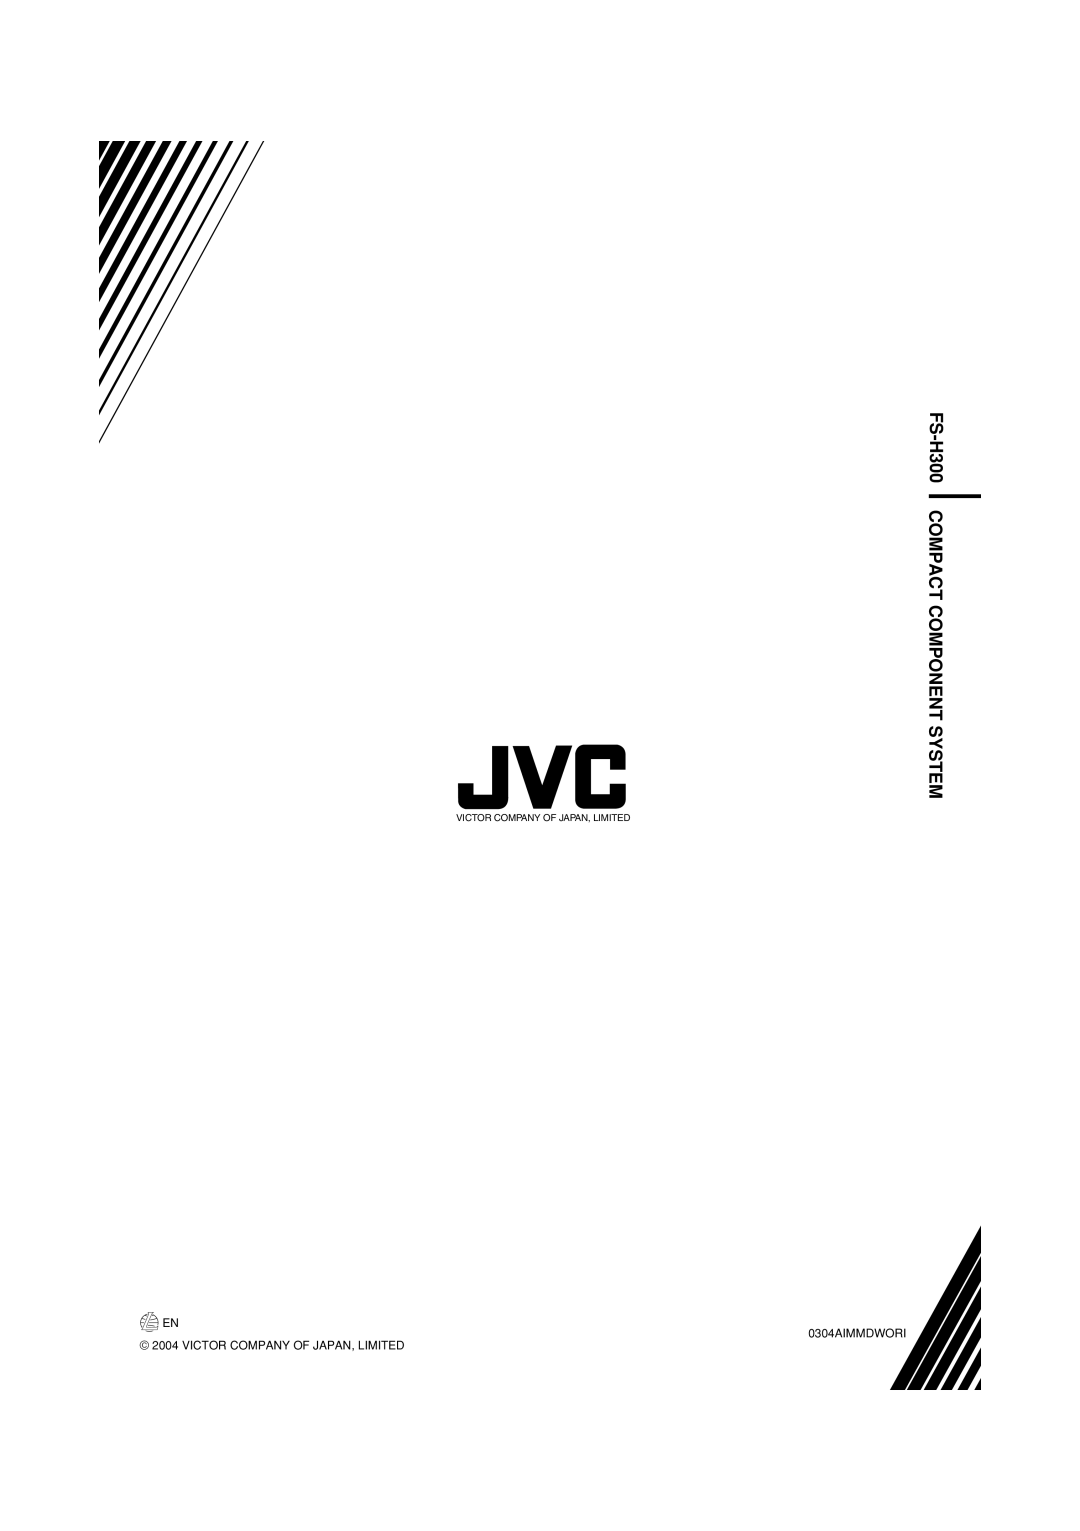 JVC manual FS-H300COMPACT COMPONENT SYSTEM, EN 0304AIMMDWORI, Victor Company Of Japan, Limited 